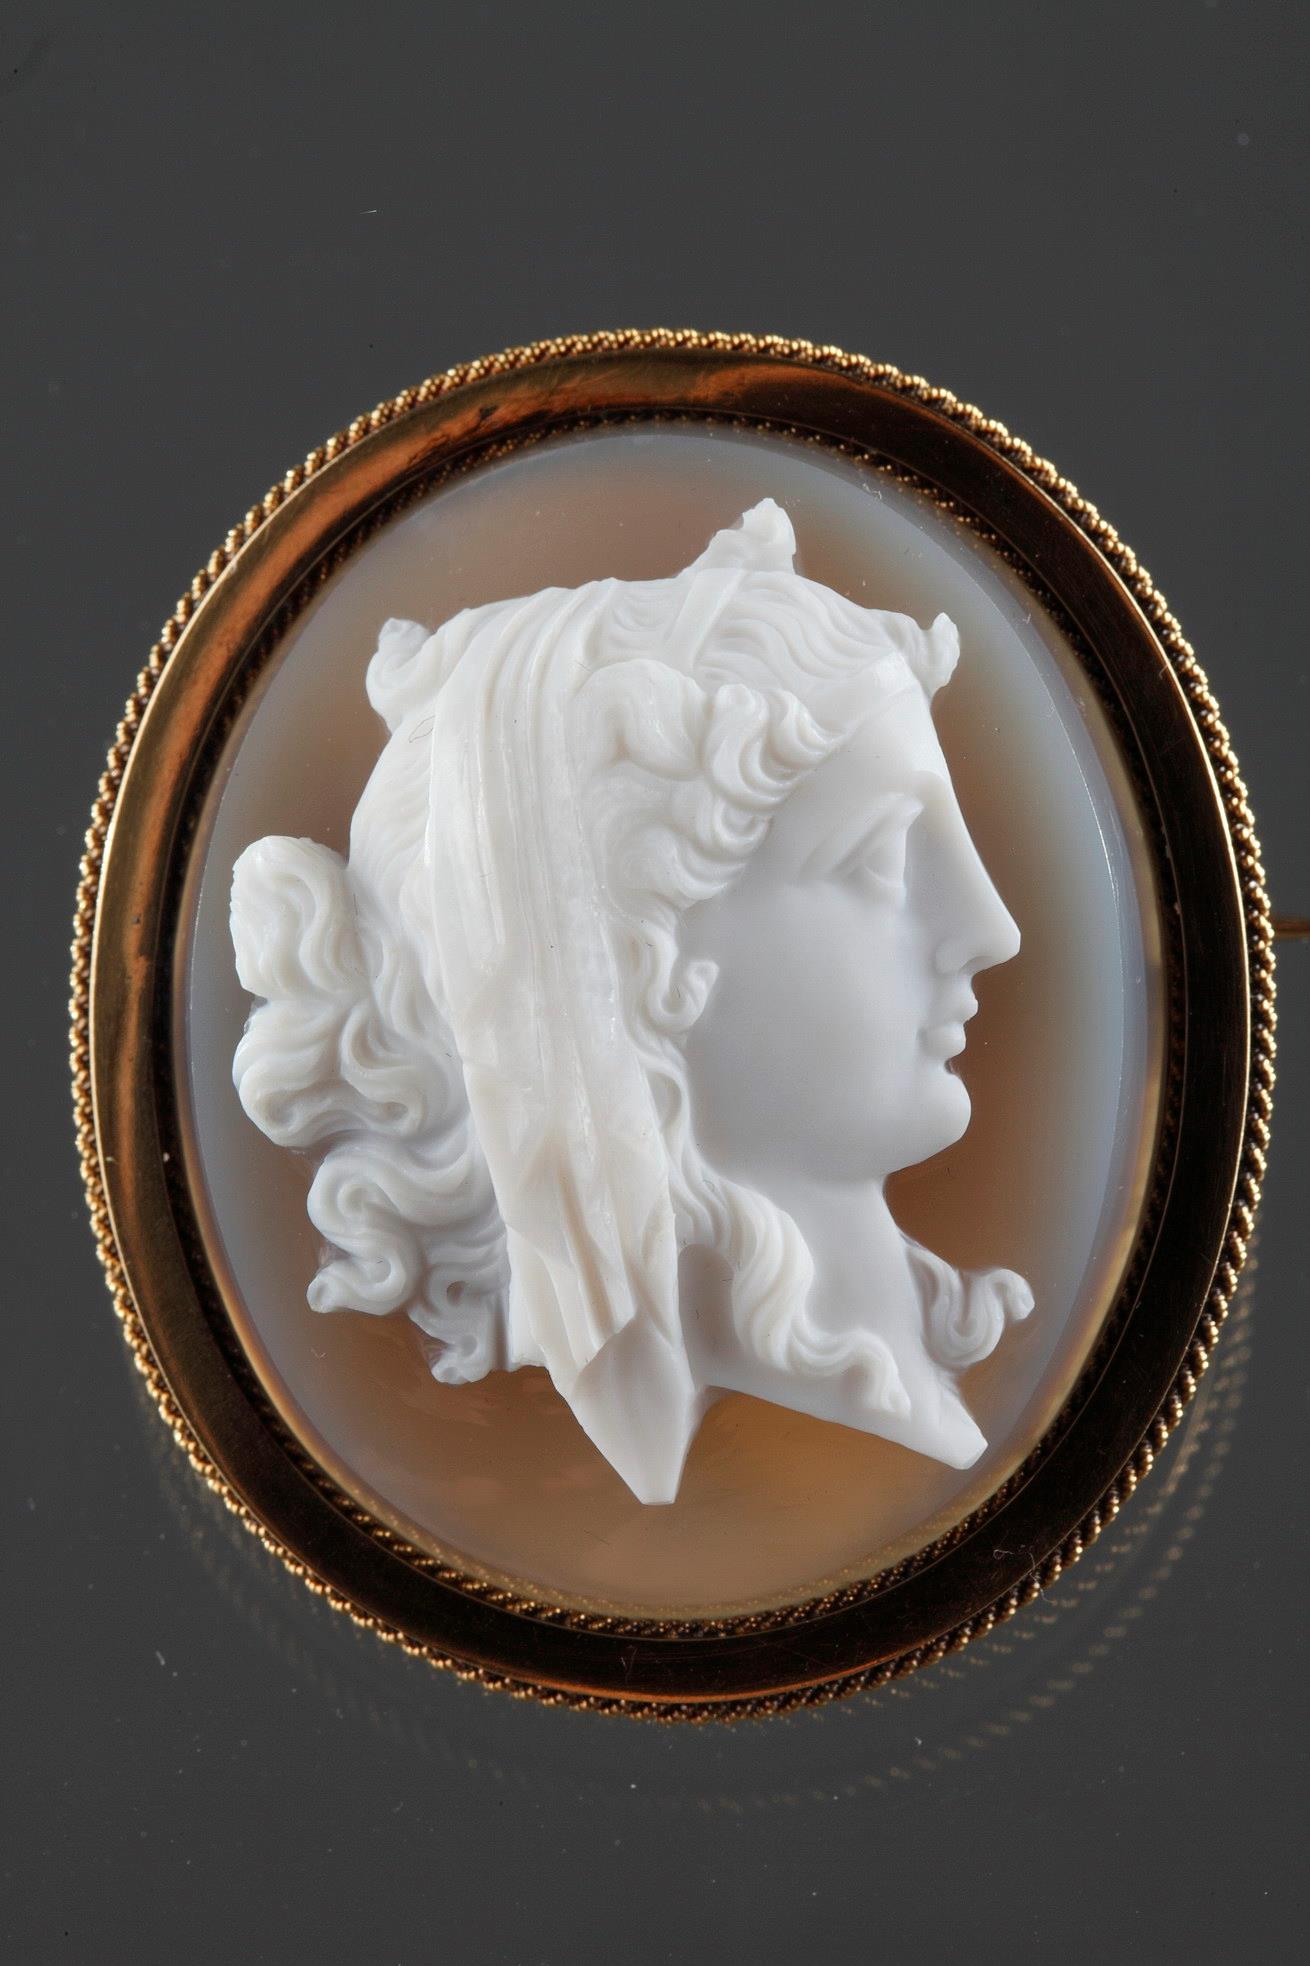 19th century gold brooch and Cameo on agate. 